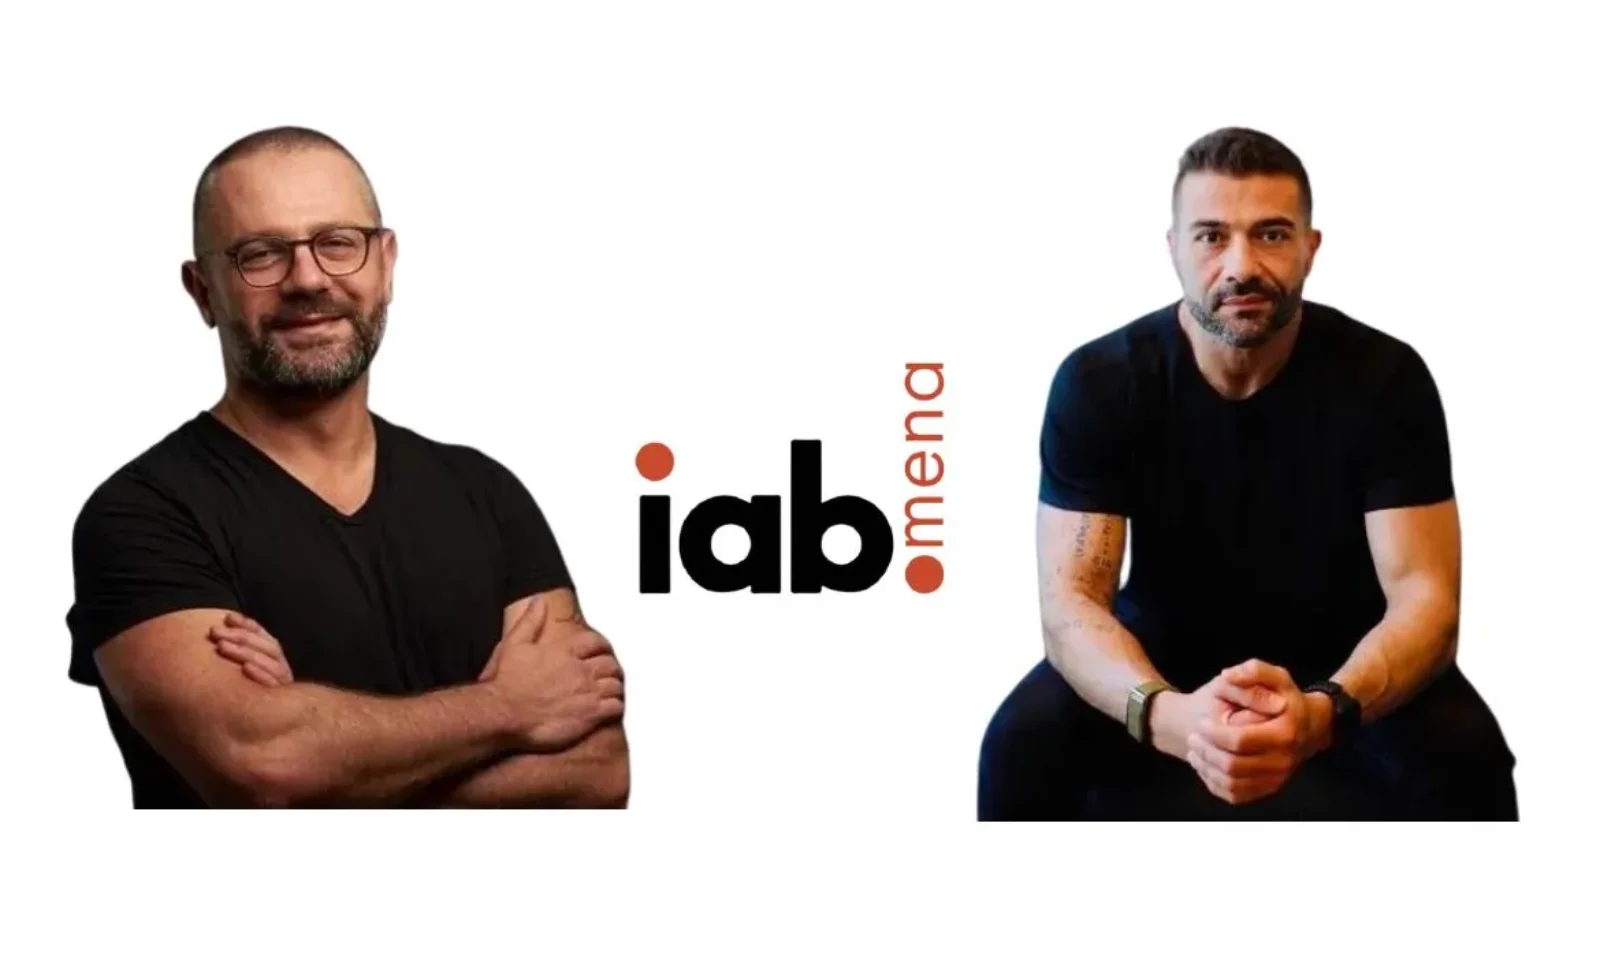 Choueiri Group, IAB MENA, Omnicom Media Group, General Assembly, tech platforms, companies, agencies, publishers, sale houses, Amazon, recommendations, Michael Malkoun, Christos Solomi, recommendations, analyses, updates, reports, task forces, professional growth,